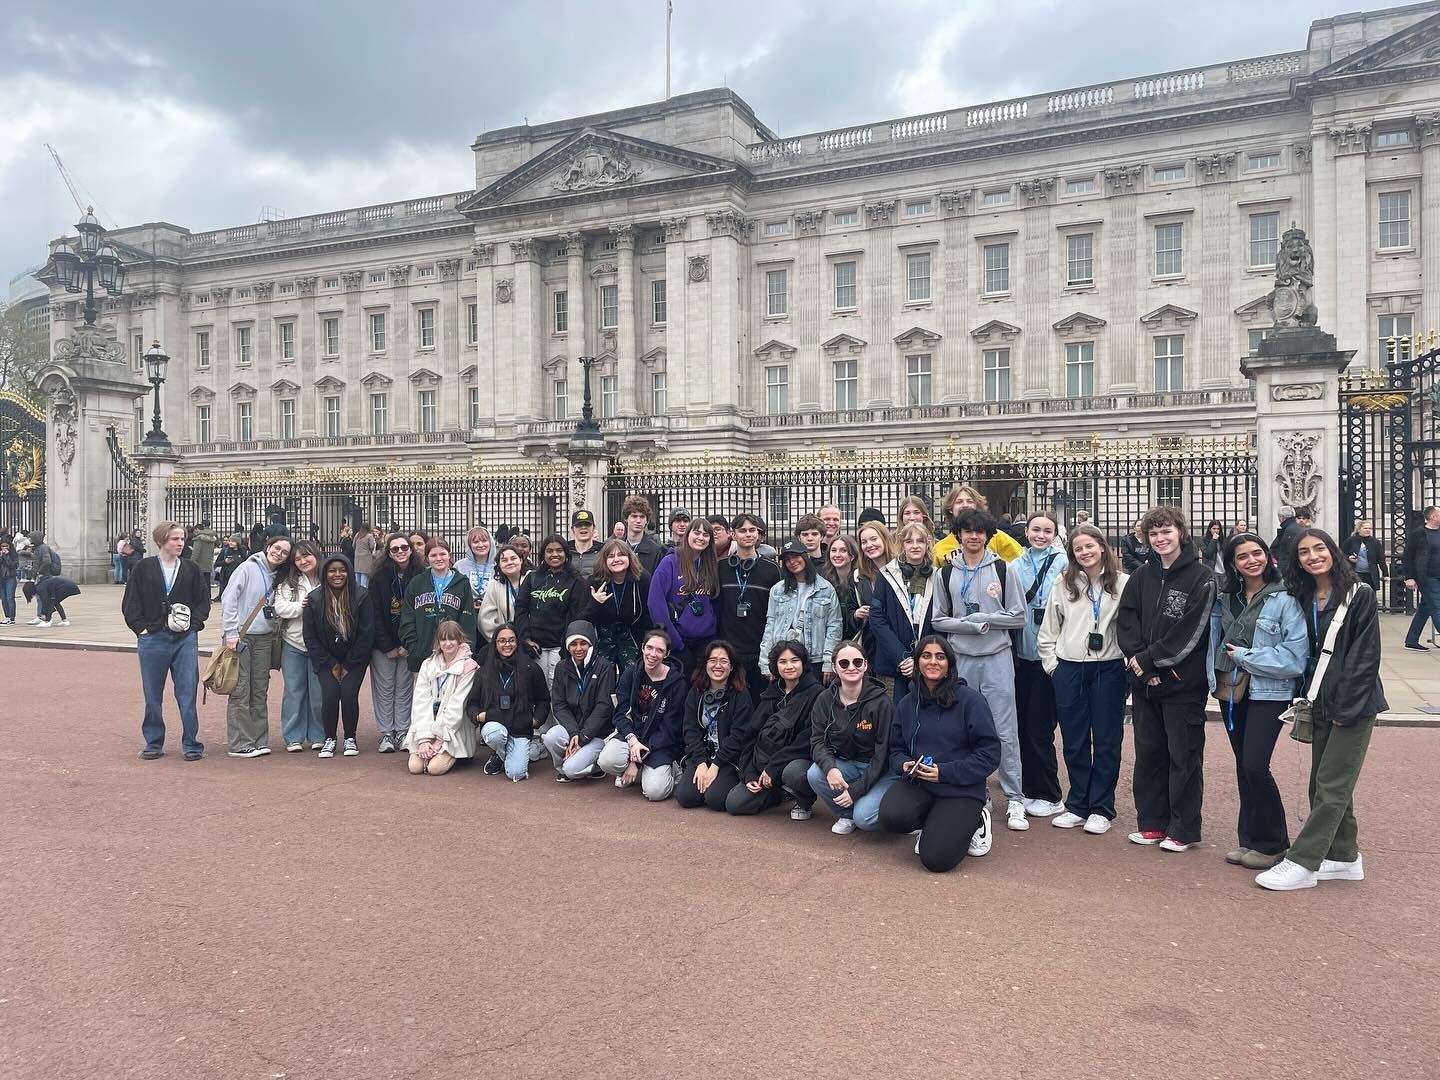 The Mayfield Drama Students are having a great time in  London this week! @londontheatre